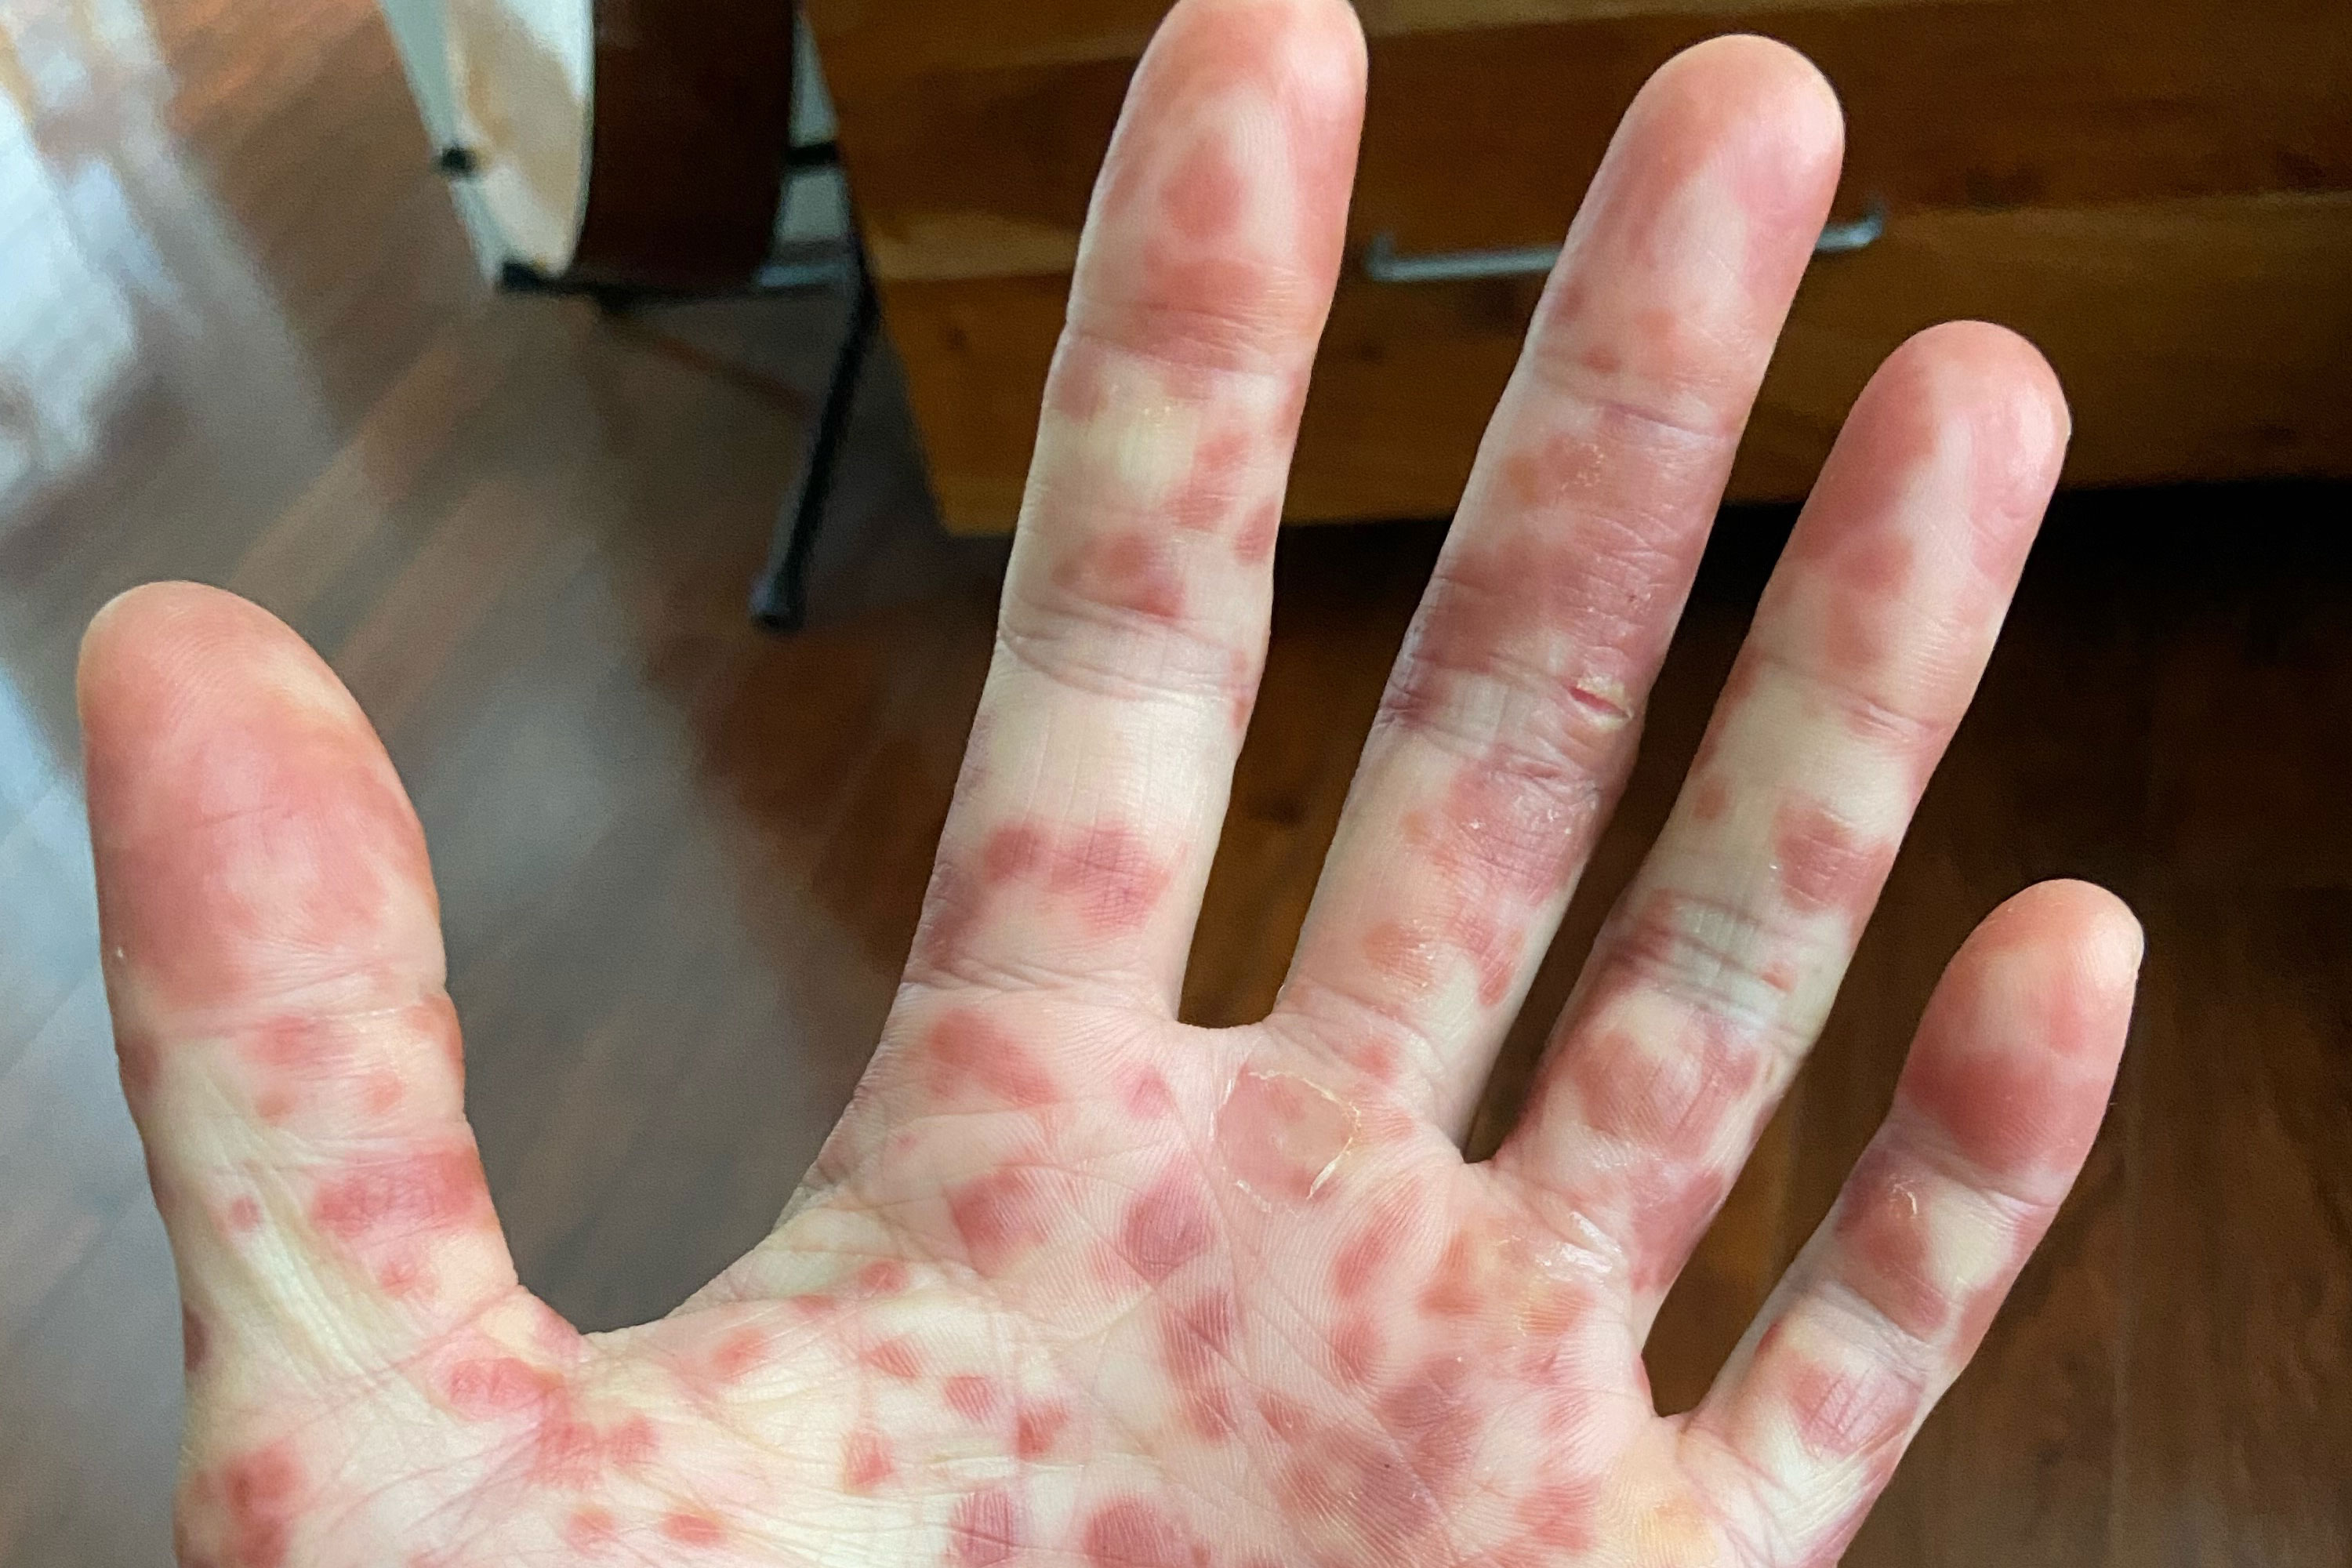 What are the Symptoms of Monkeypox?